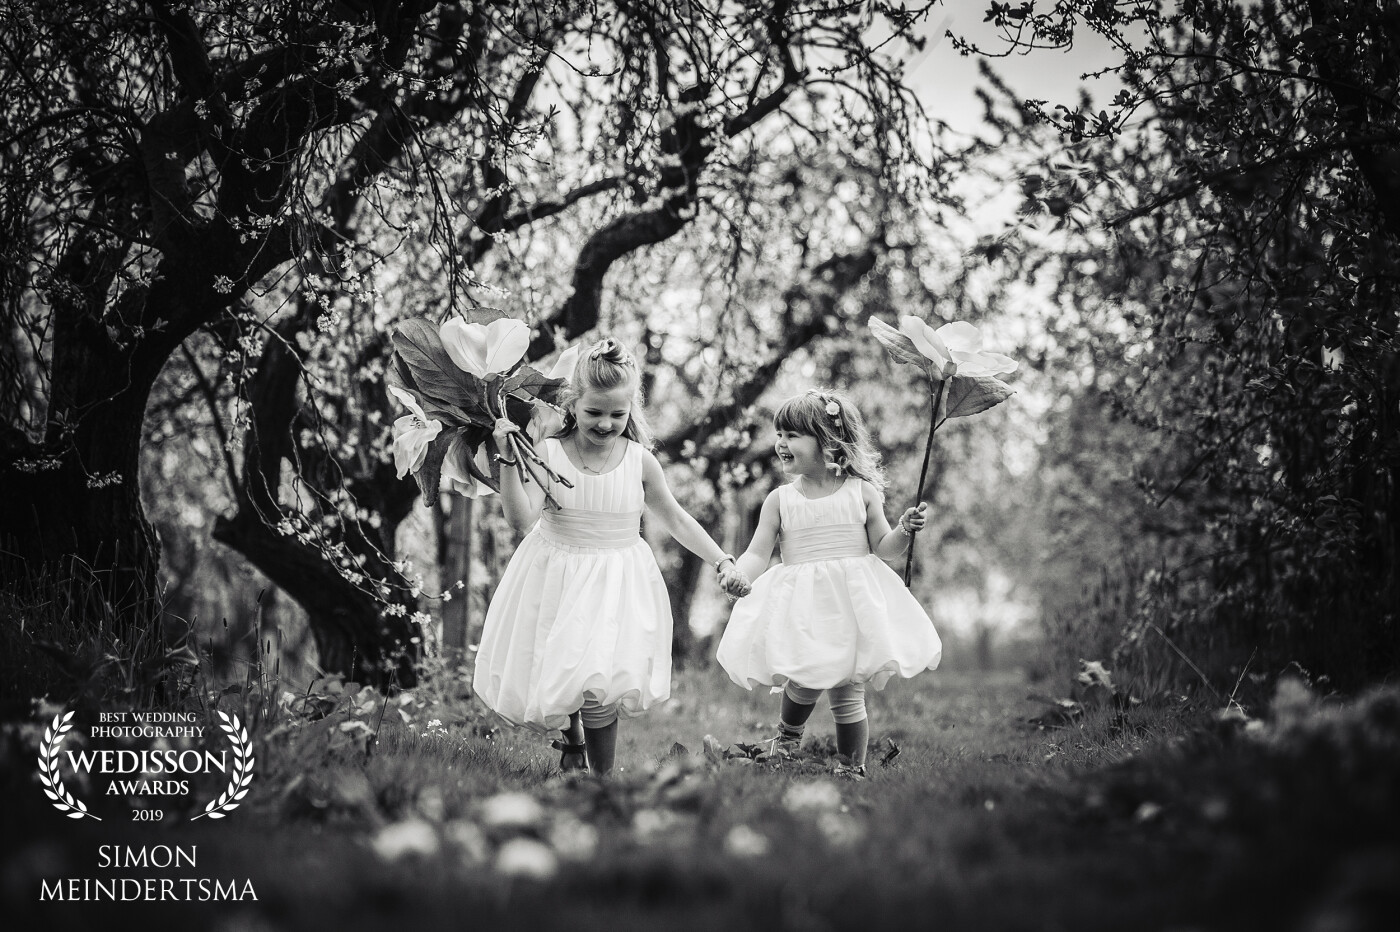 I just love kids at weddings, so pure they are! This was a setting in an apple tree garden where they just had some fun with big flowers running hand in hand.